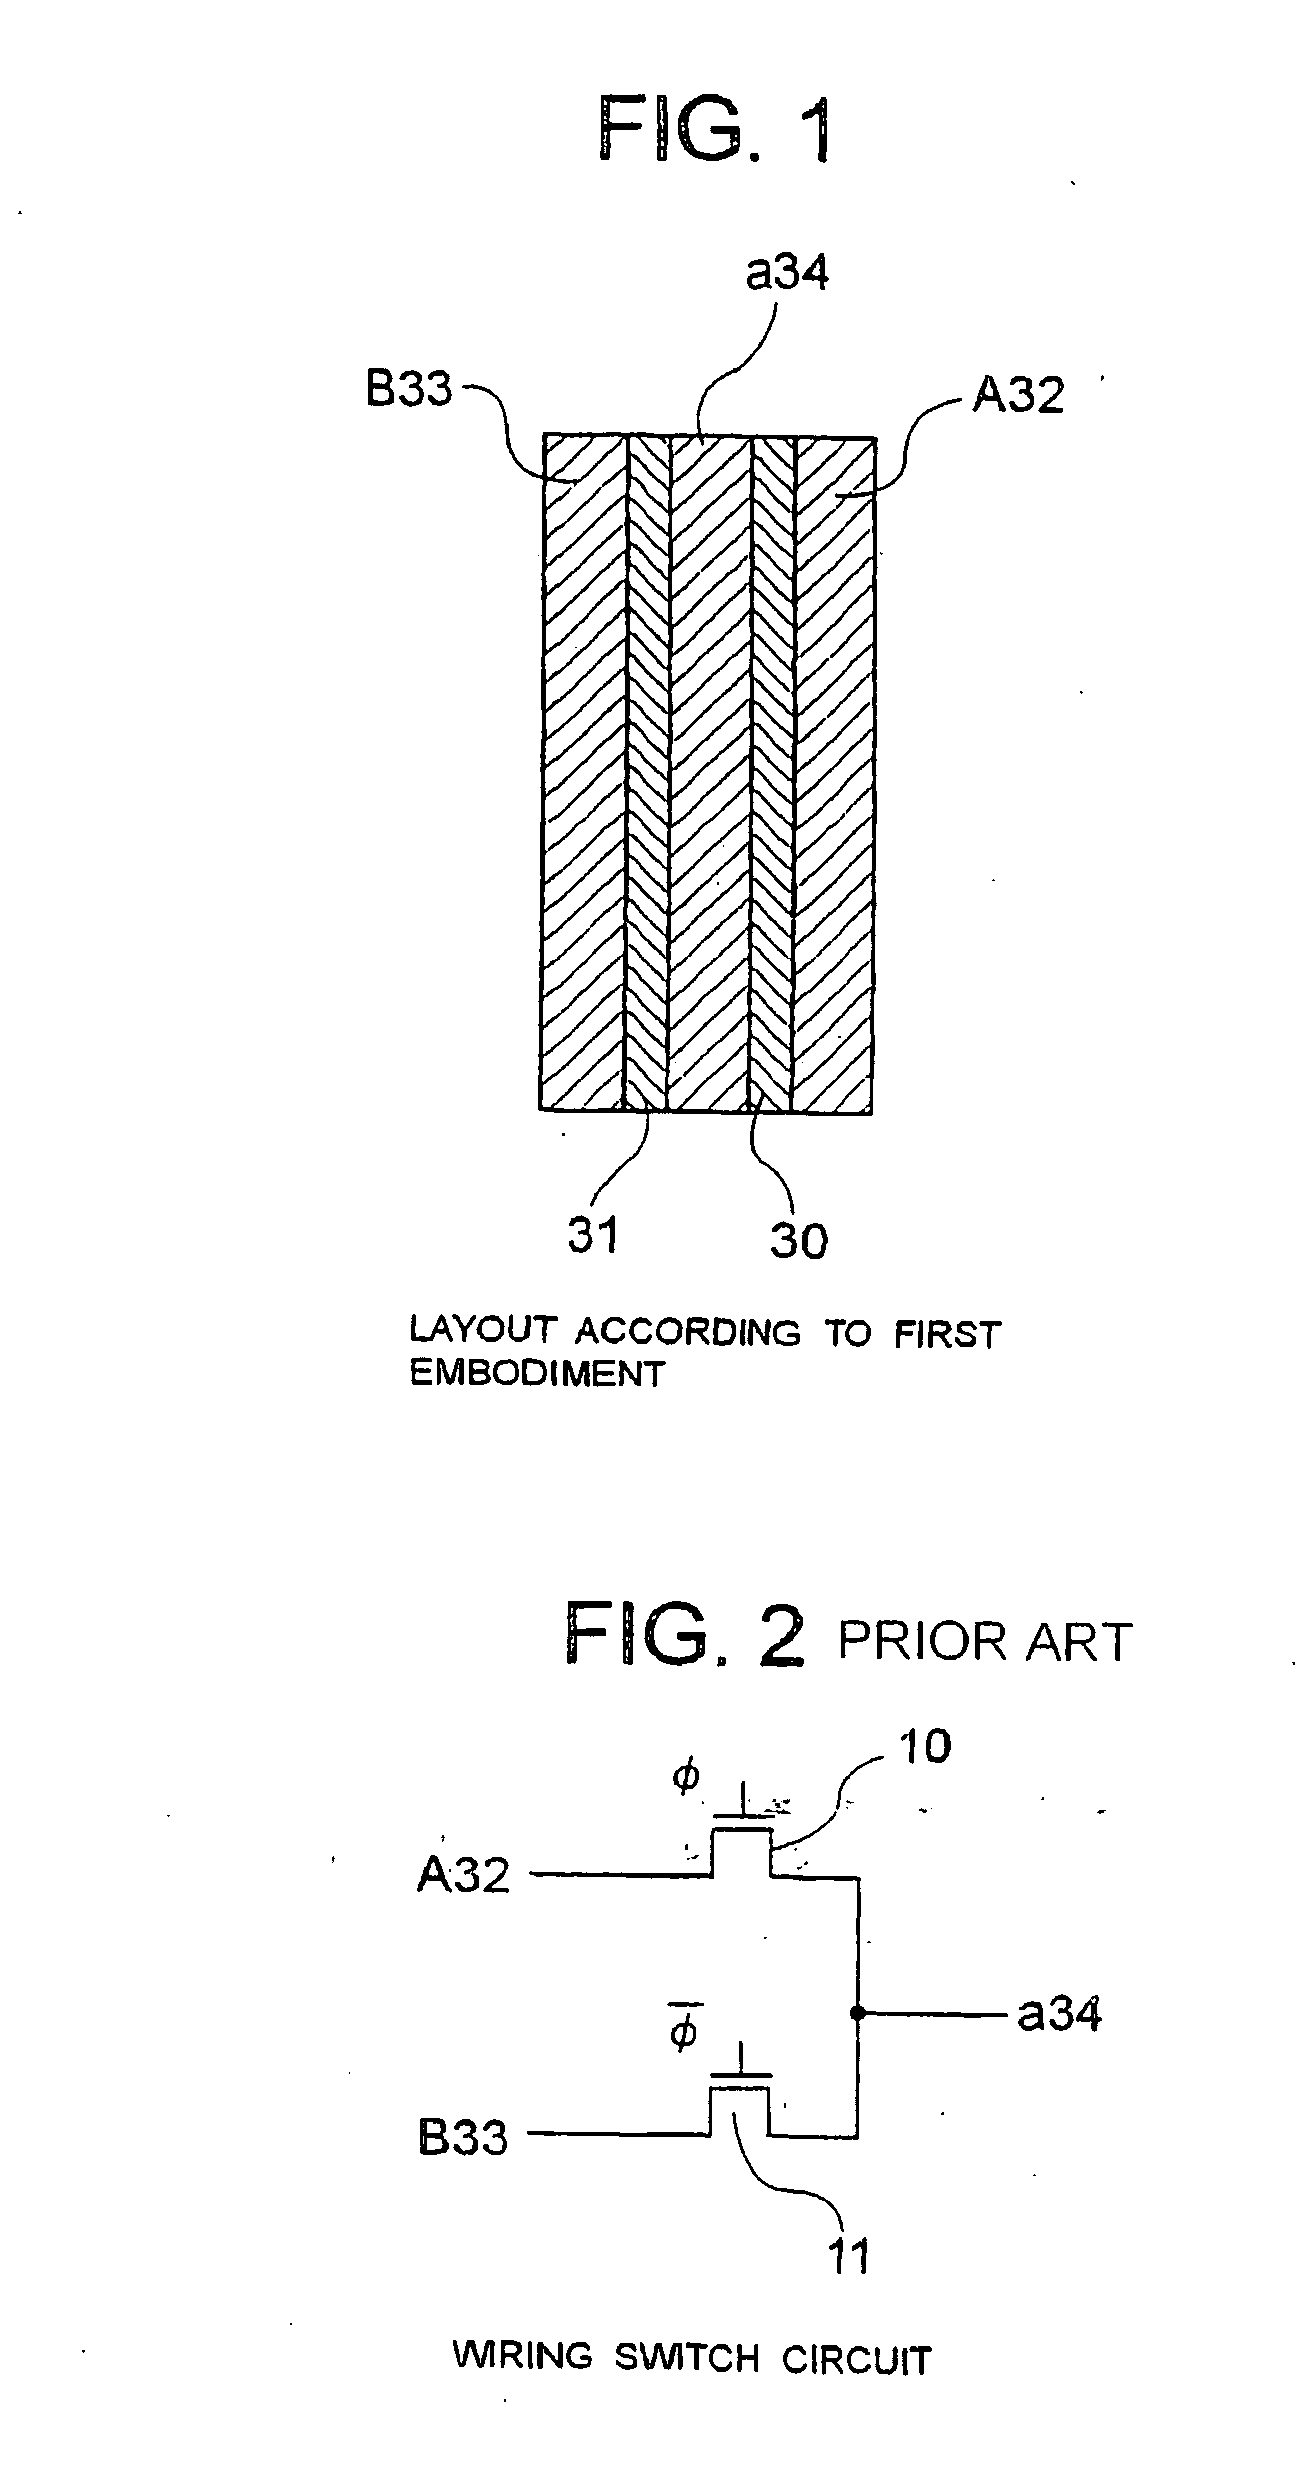 Semiconductor integrated circuit, method of manufacturing semiconductor integrated circuit, charge pump circuit, layout designing apparatus, and layout designing program